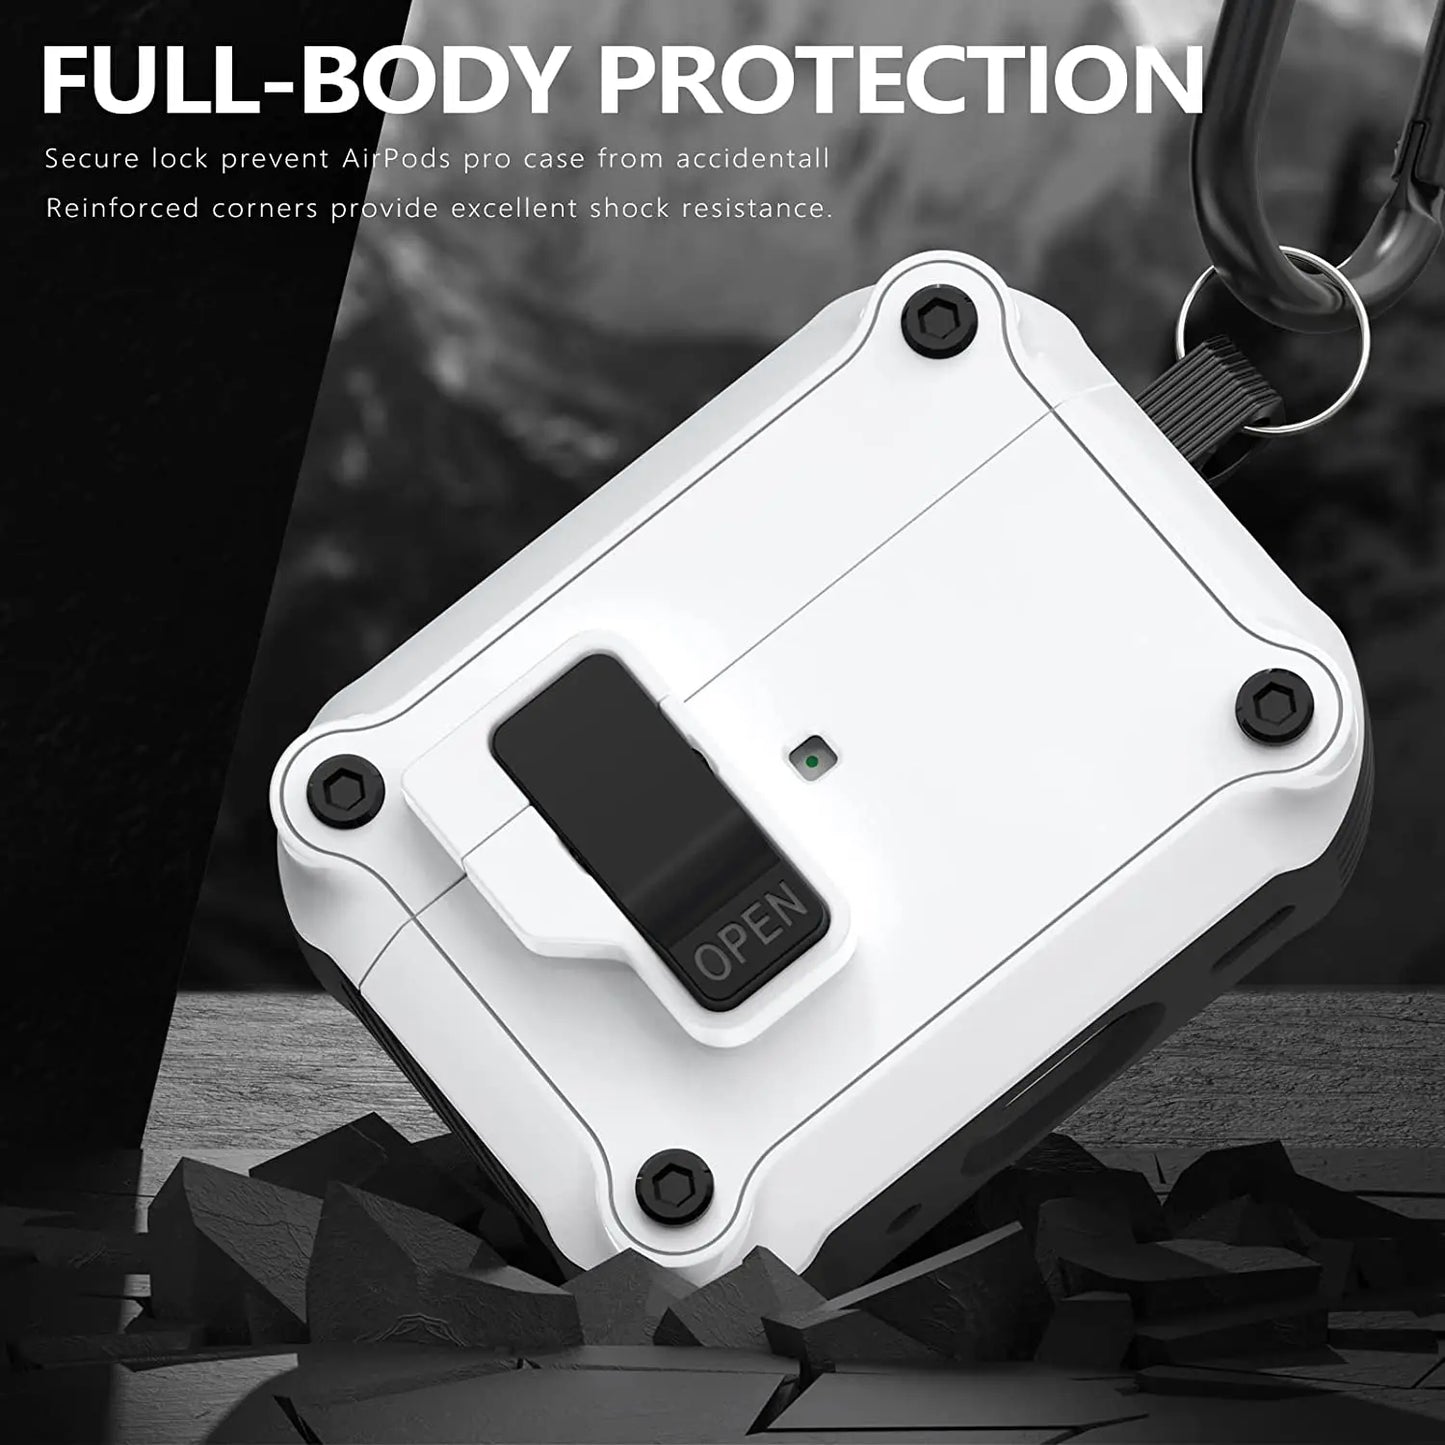 Locking AirPods Case: Prevent Loss with SecureSnap Technology